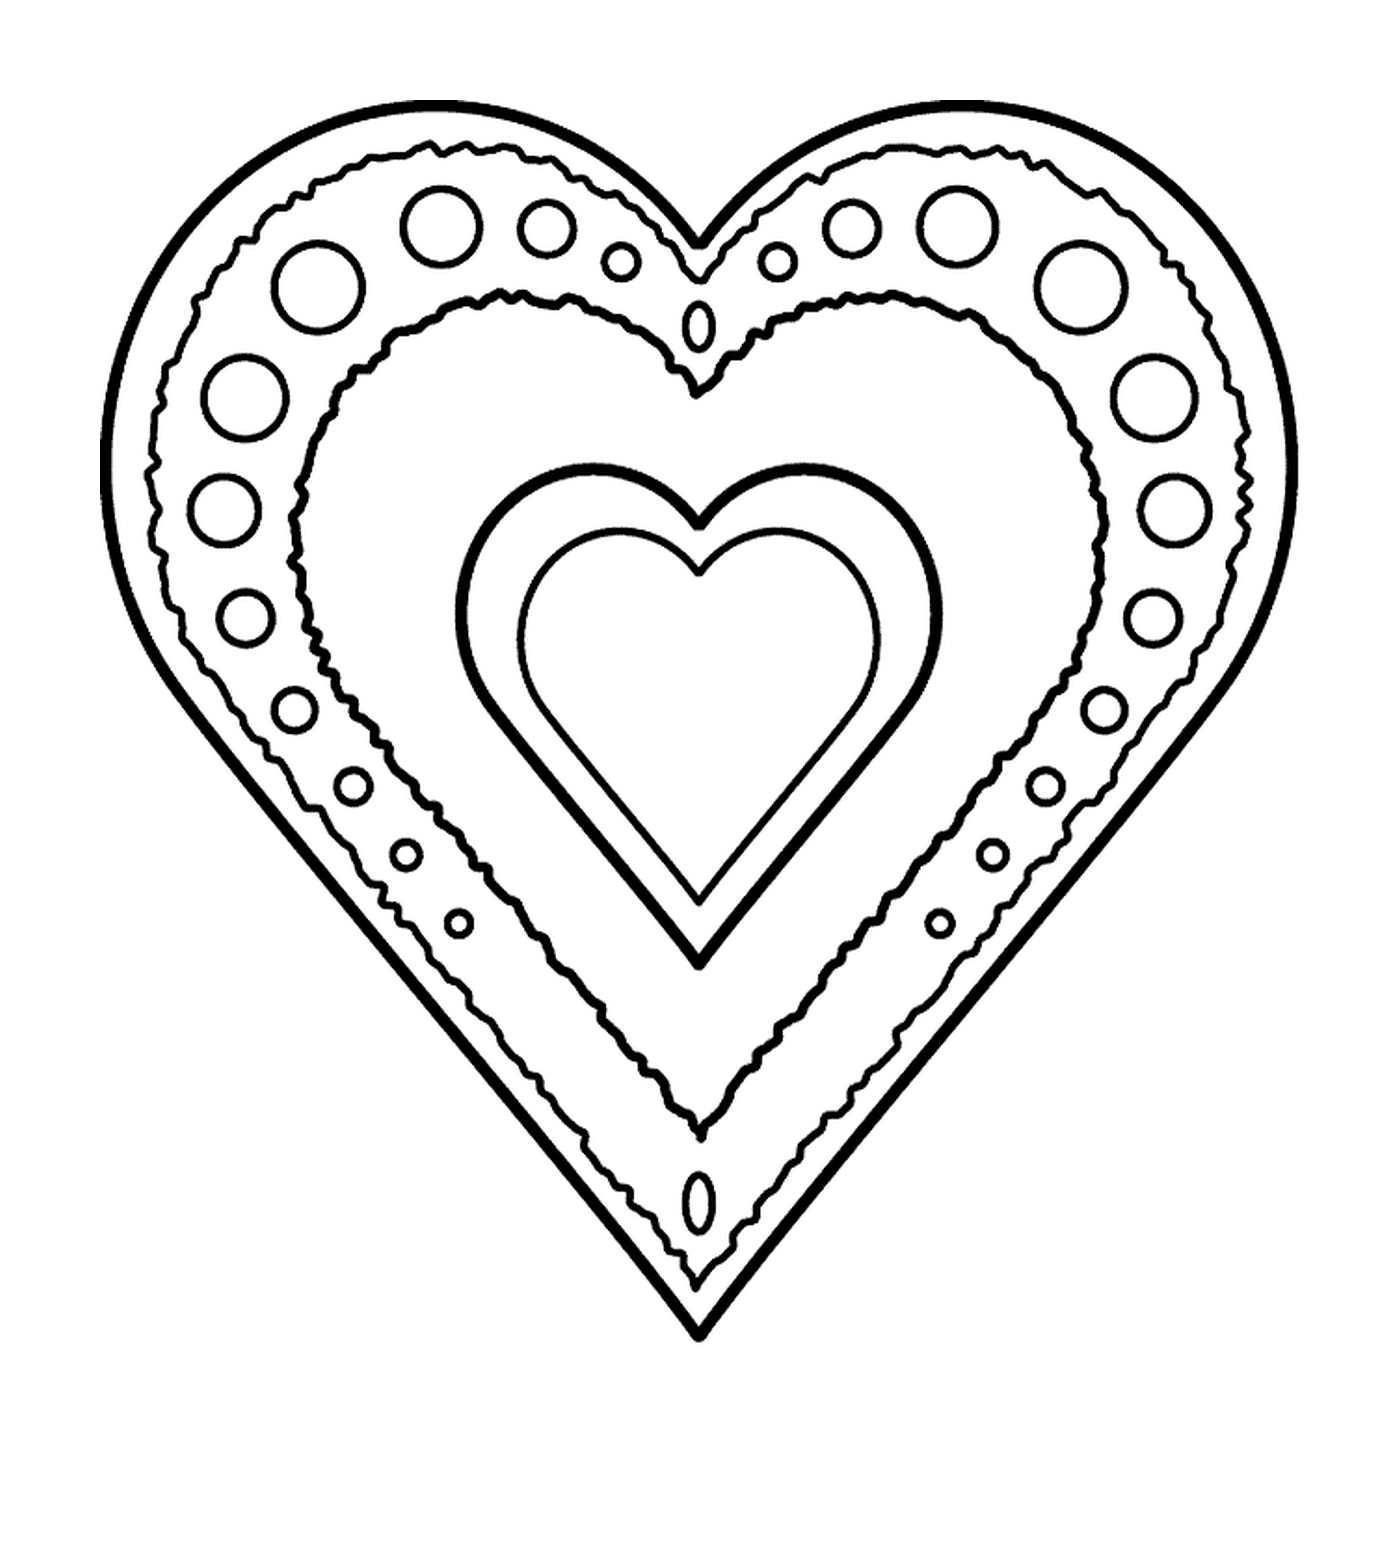  Simple and classic heart, symbol of love 